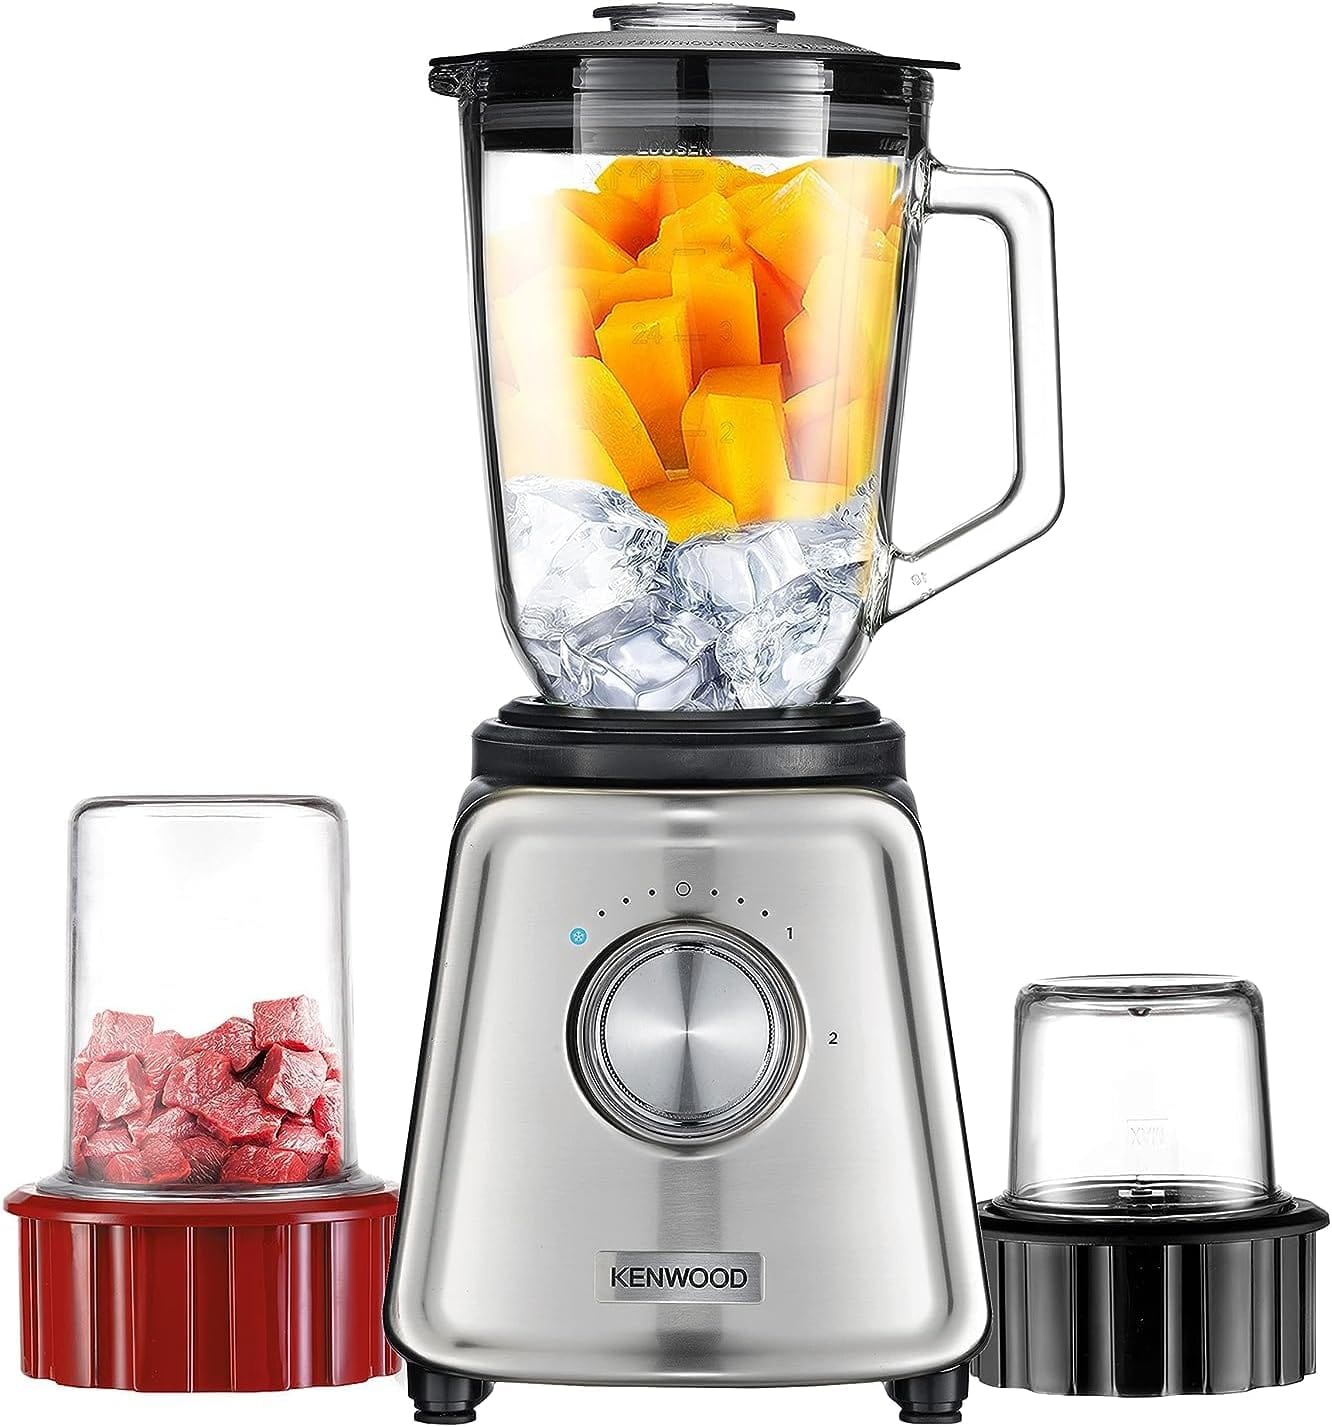 Kenwood 2L Stand Blender 800W - BLP44 | Supply Master Accra, Ghana Kitchen Appliances Buy Tools hardware Building materials